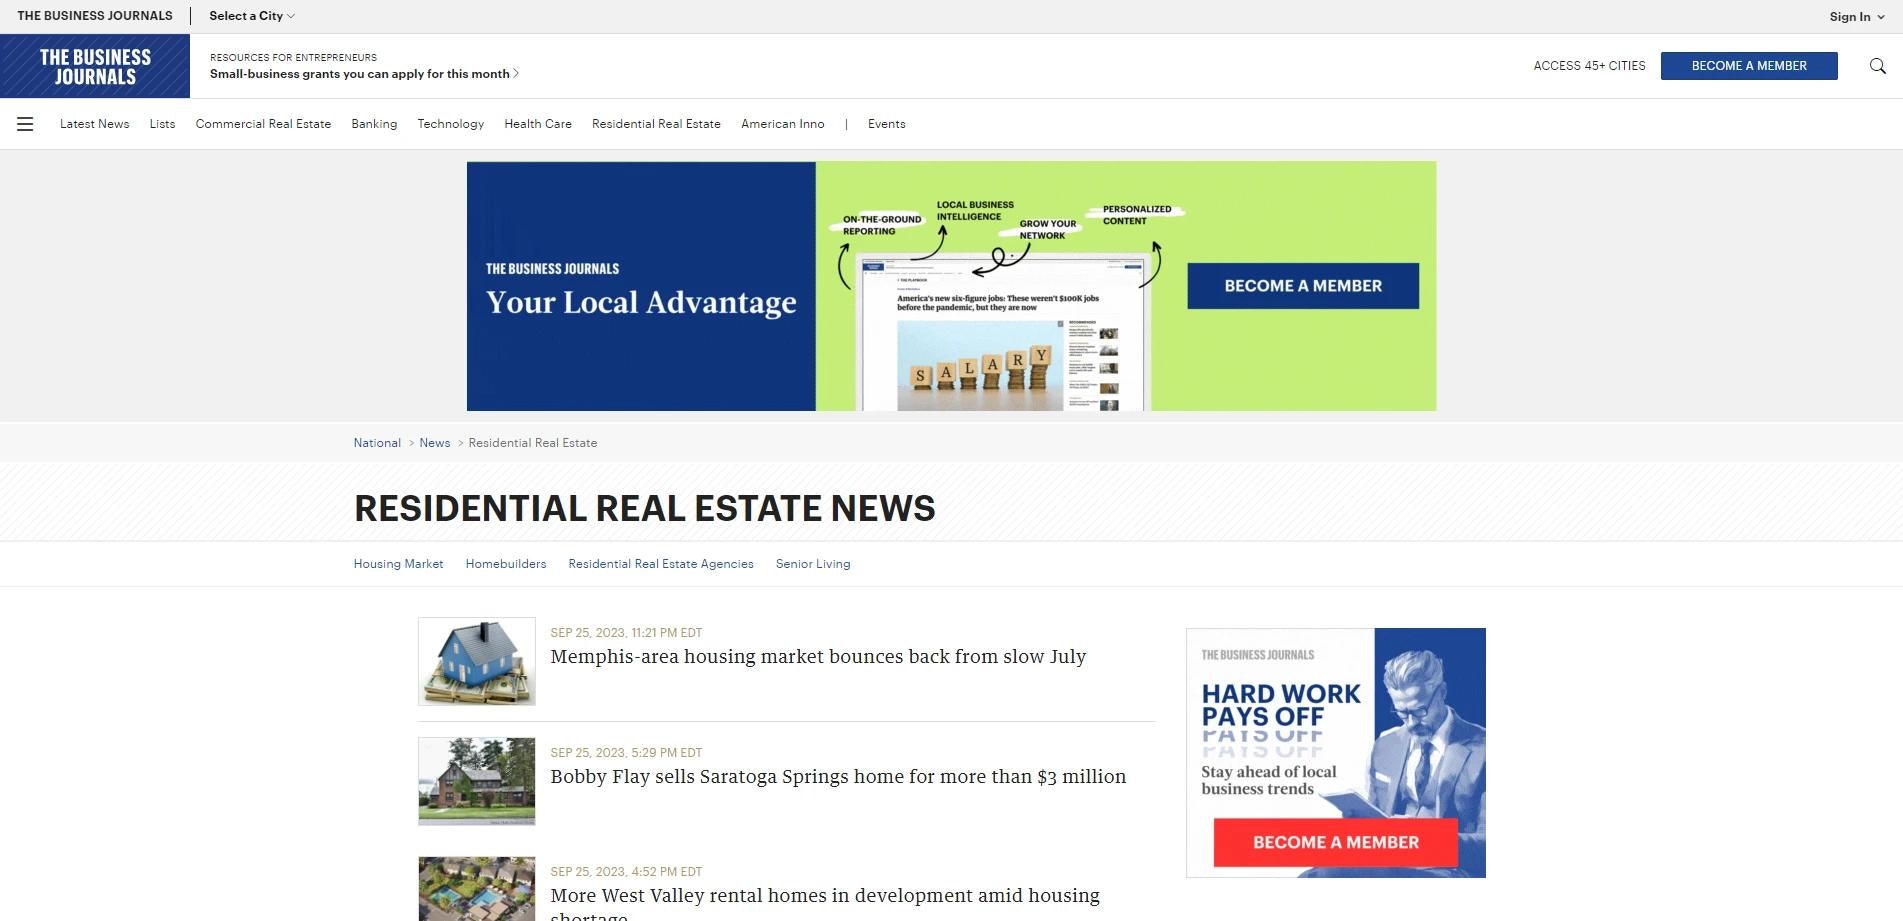 The Business Journals - Residential Real Estate News real estate blog